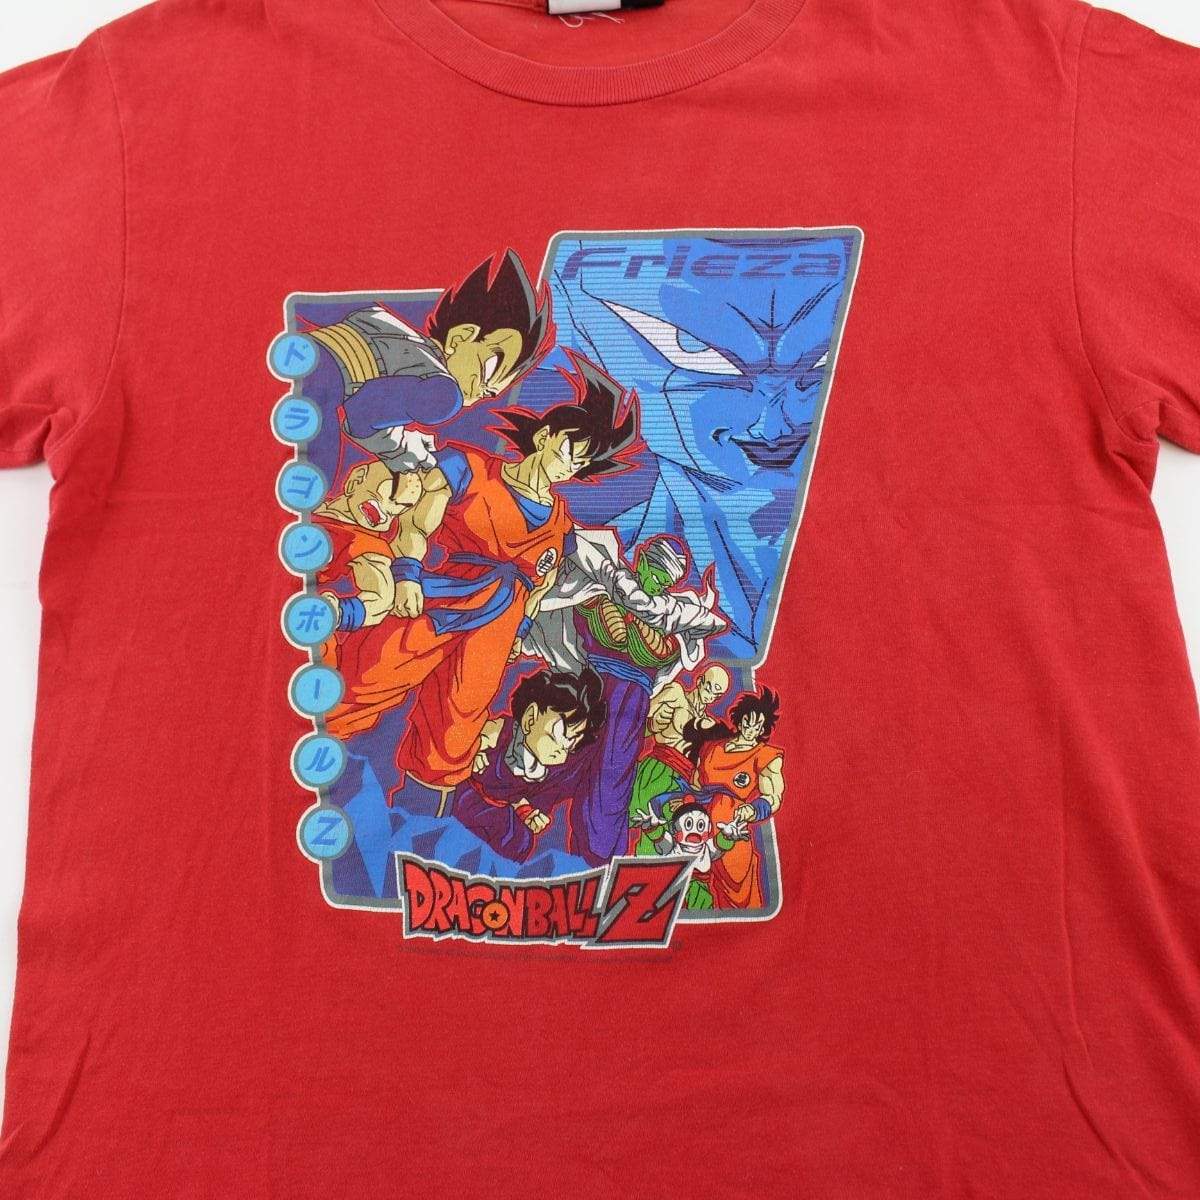 Dragon Ball Z Frieza Graphic Tee Red - SaruGeneral